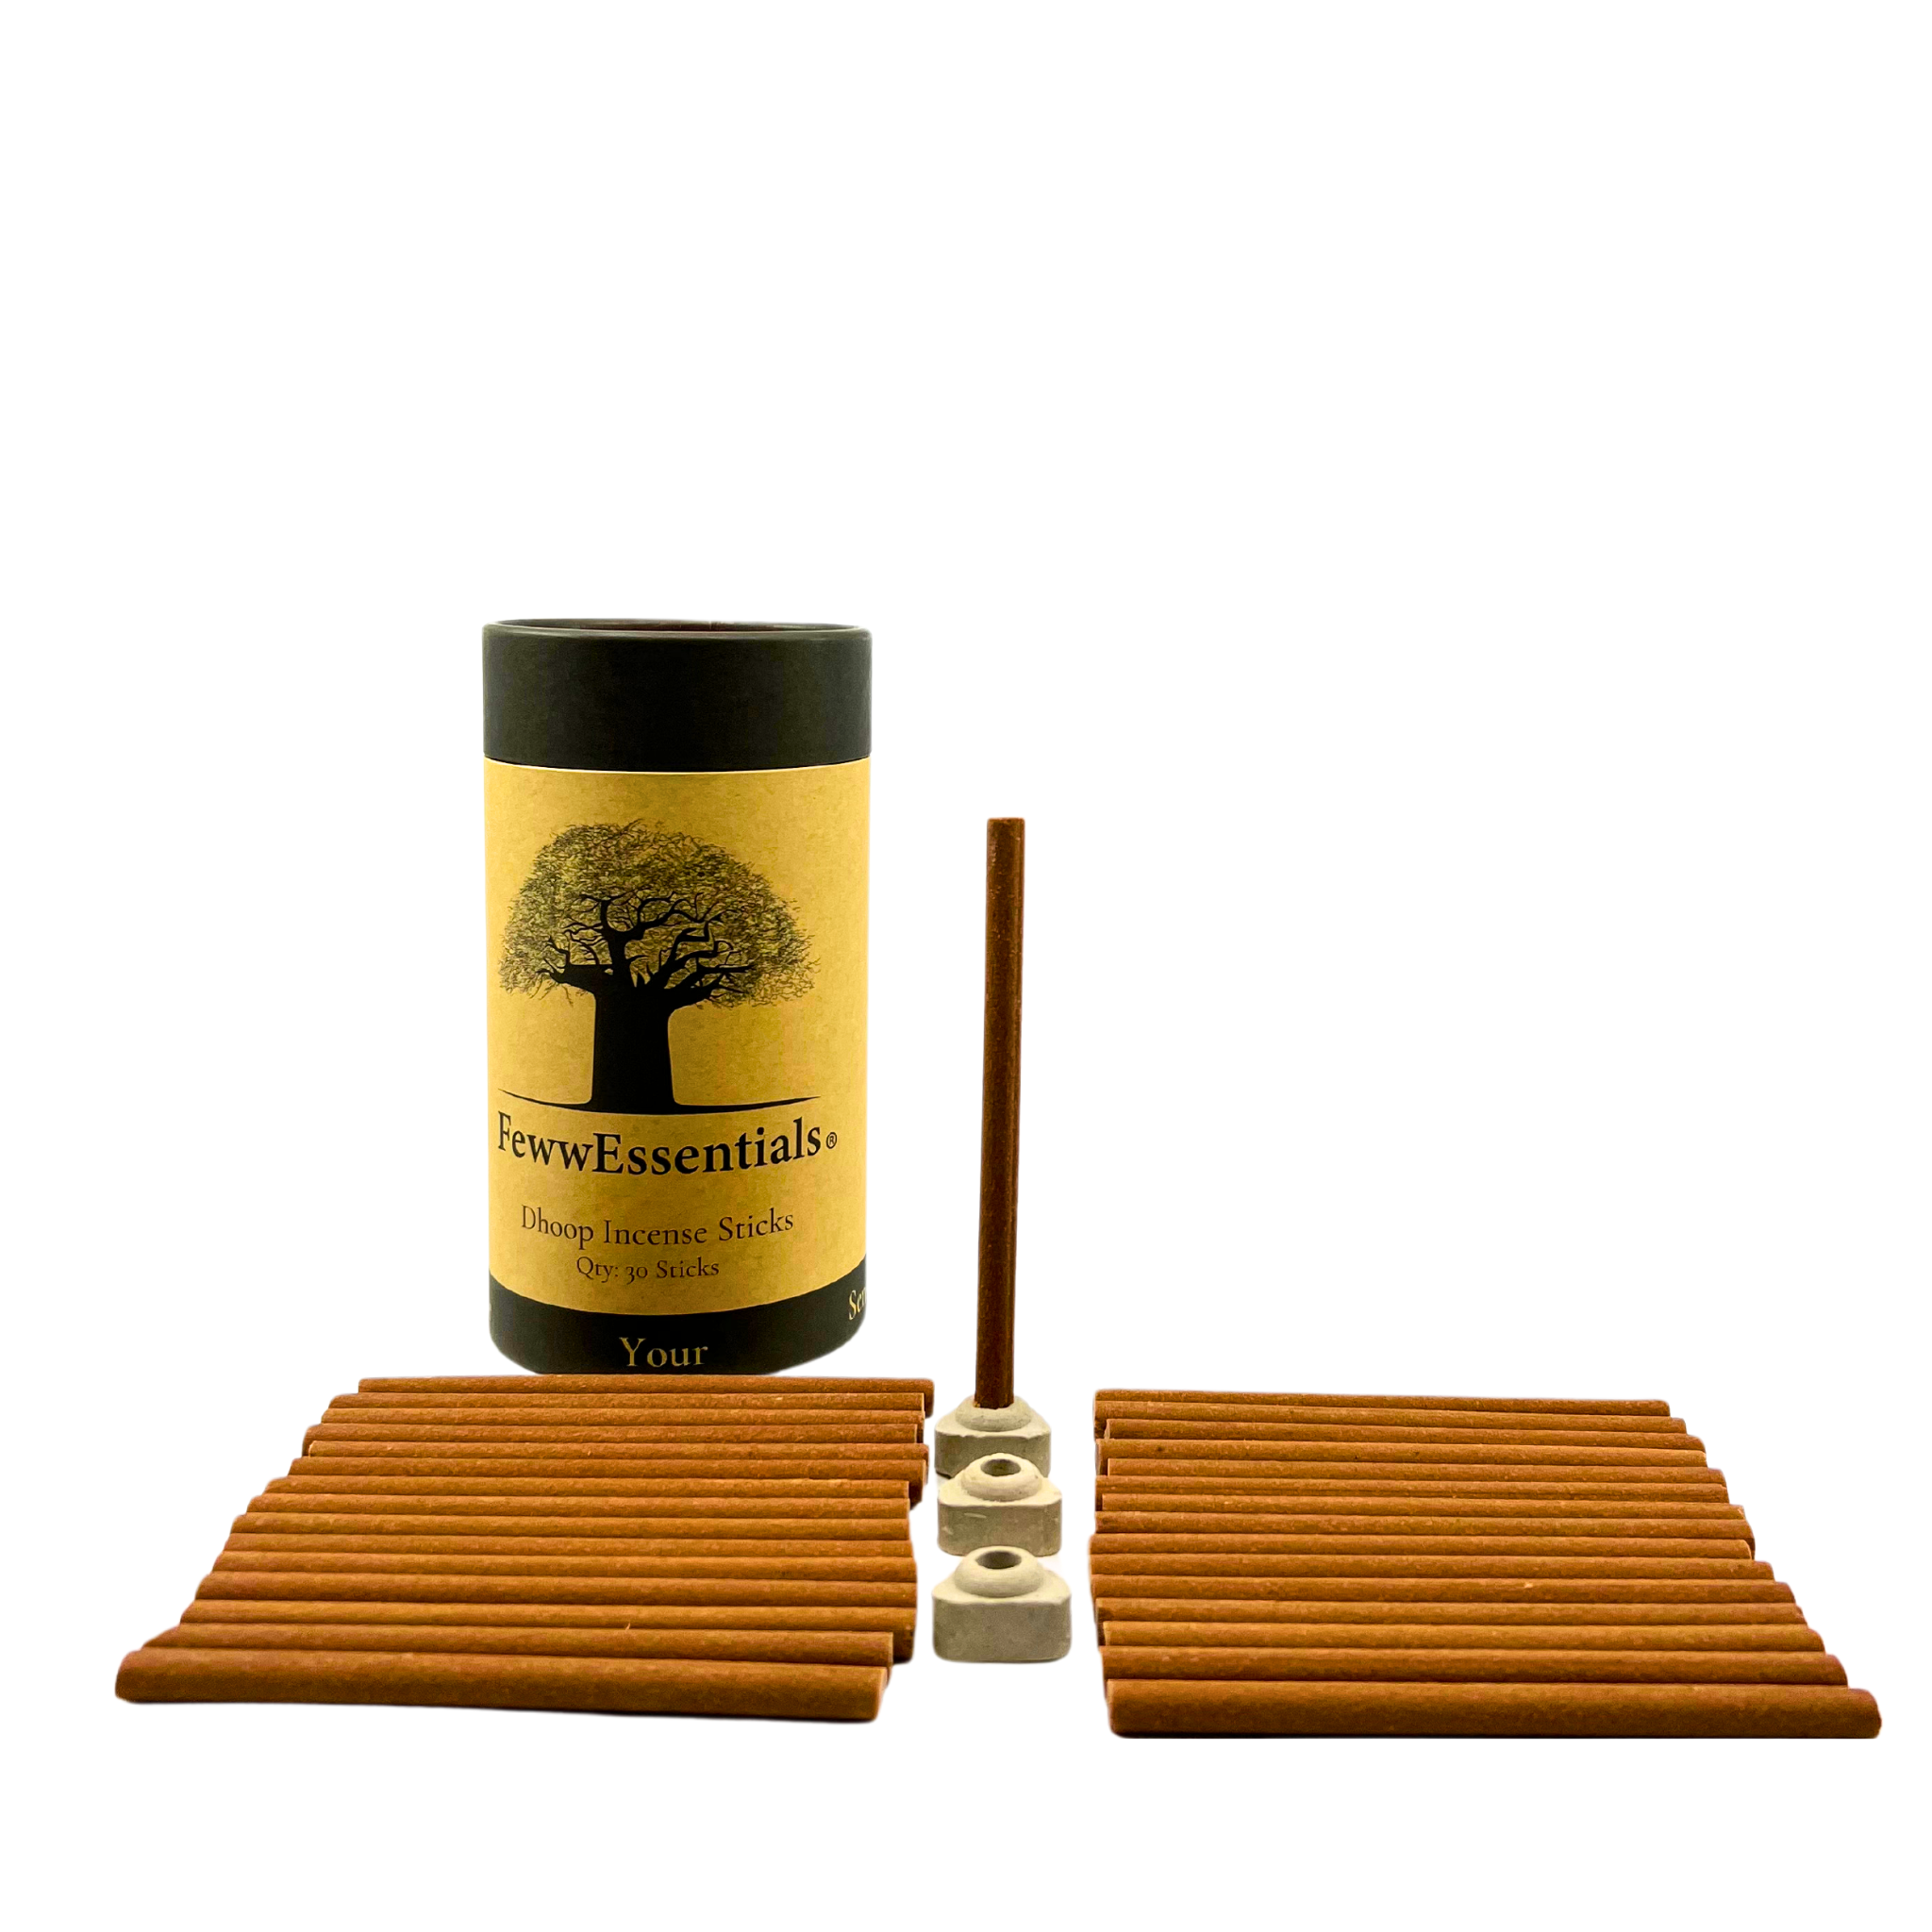 A complete set of Prosperity Dhoop Sticks, including the sticks and packaging, artfully arranged to highlight the product's design and presentation.